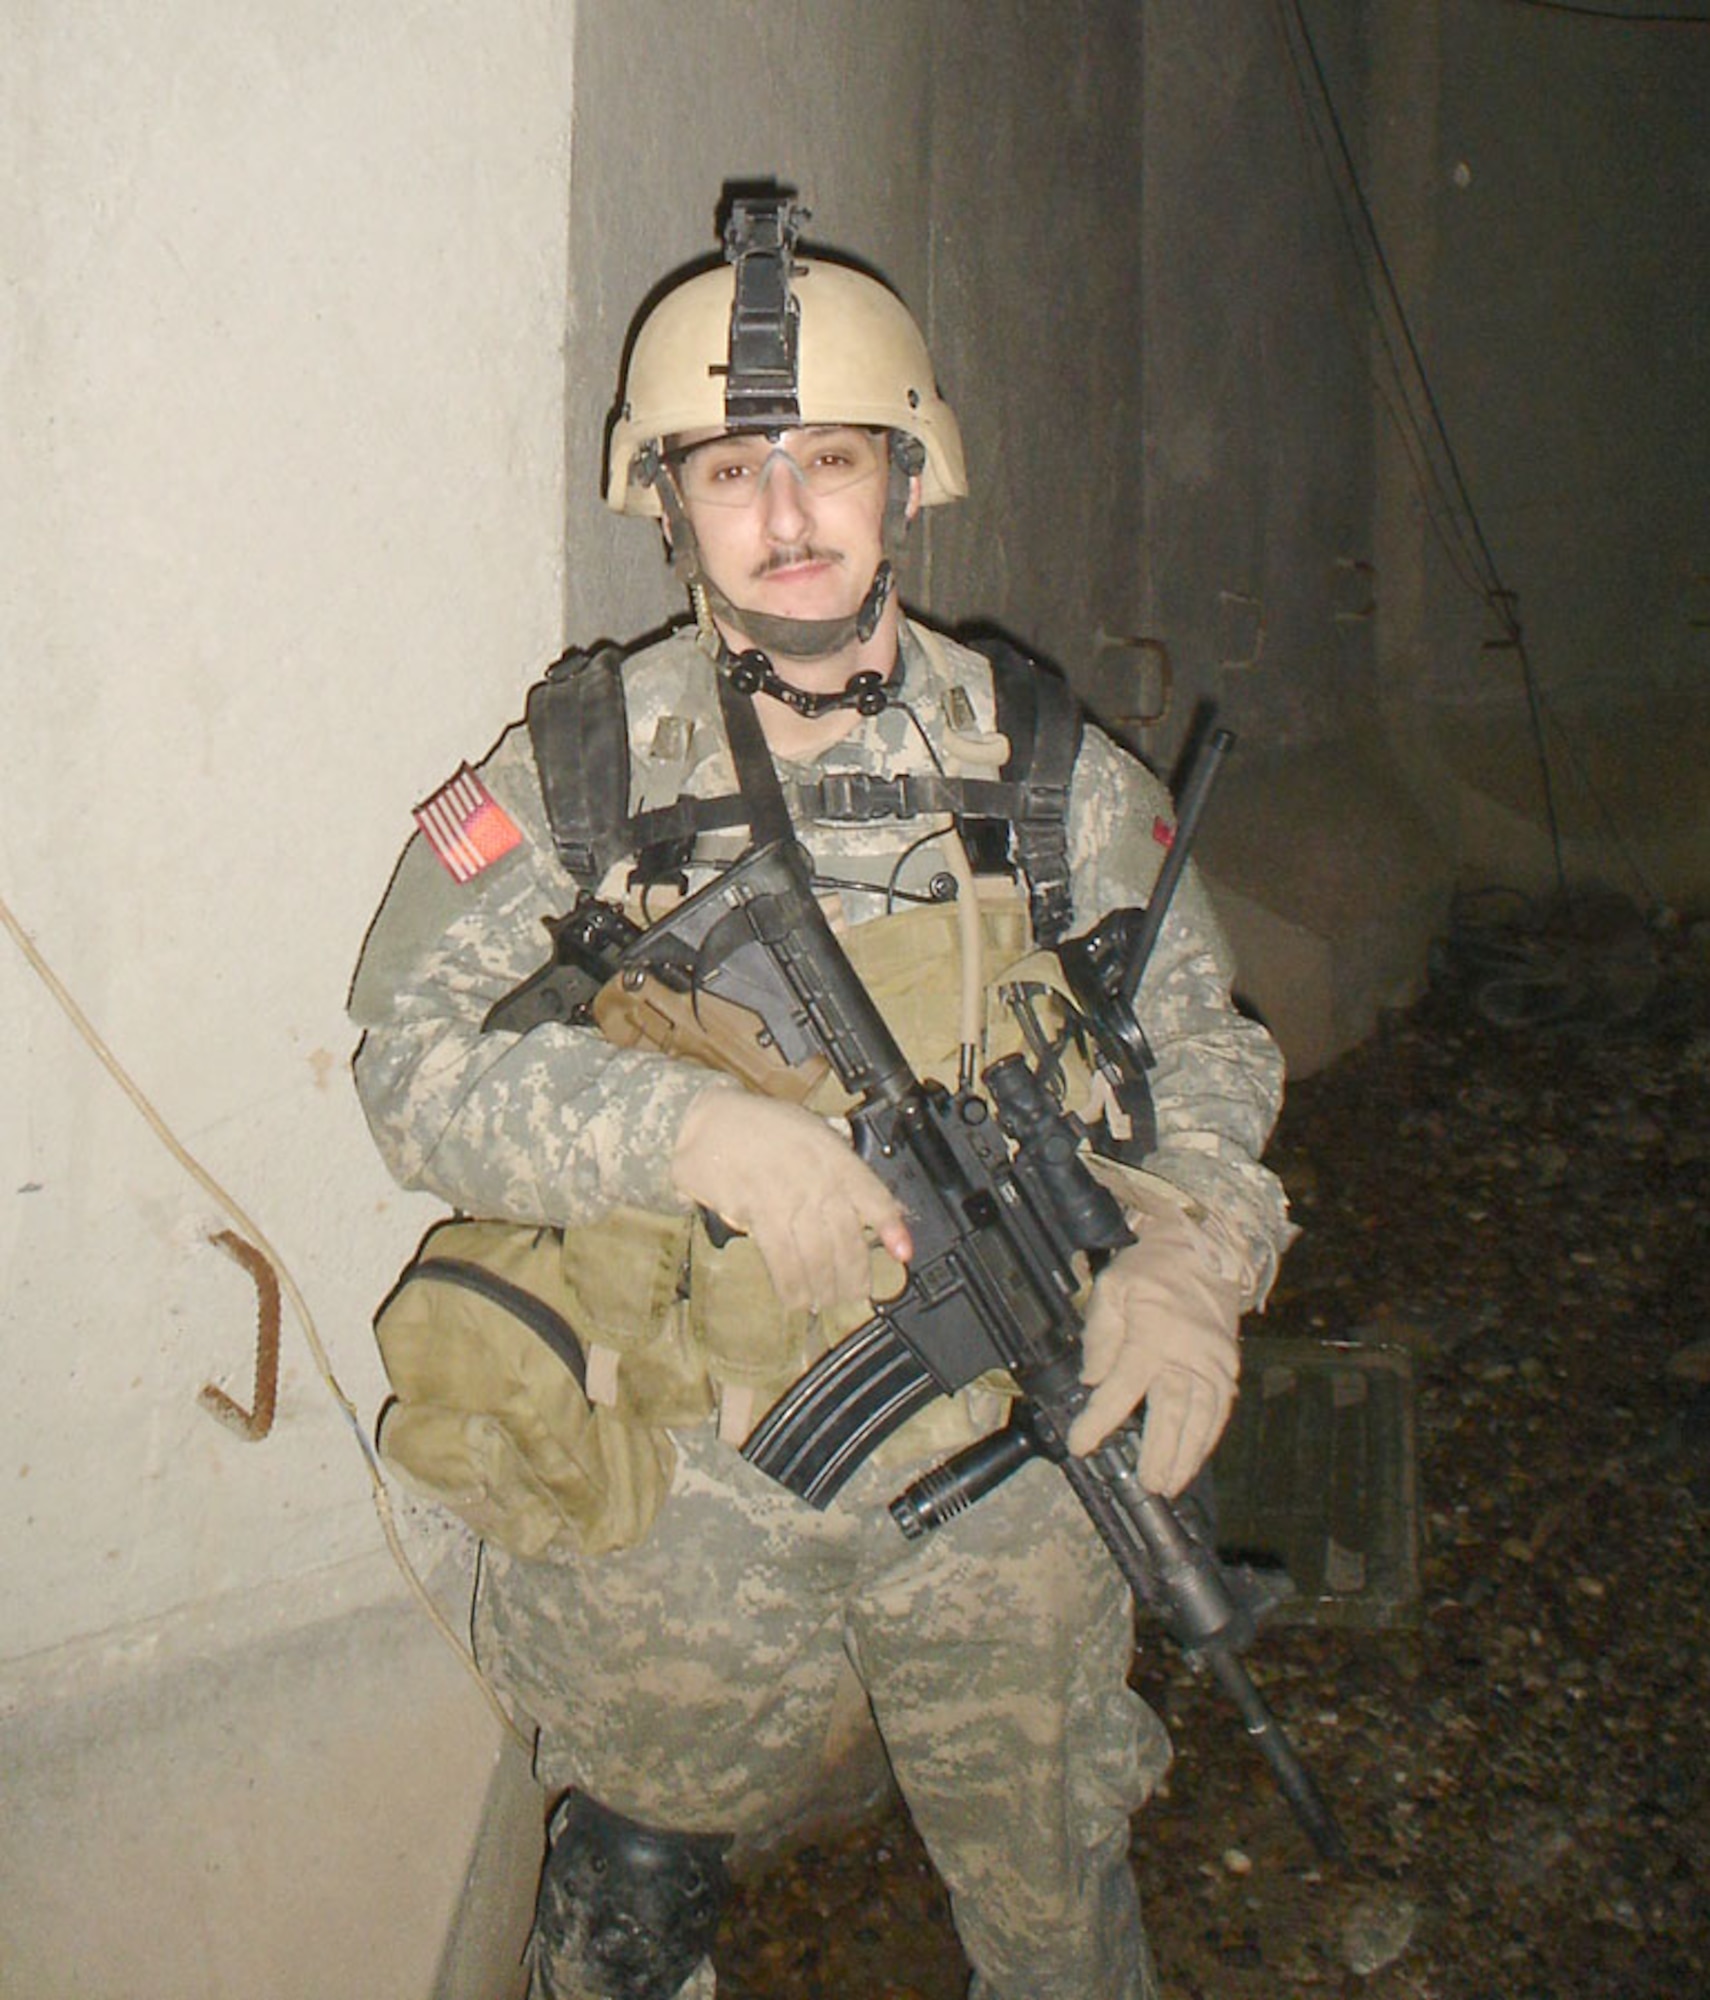 Staff Sgt. Jason Kinney, a JTAC who served four tours in Iraq. (U.S. Air Force photo)